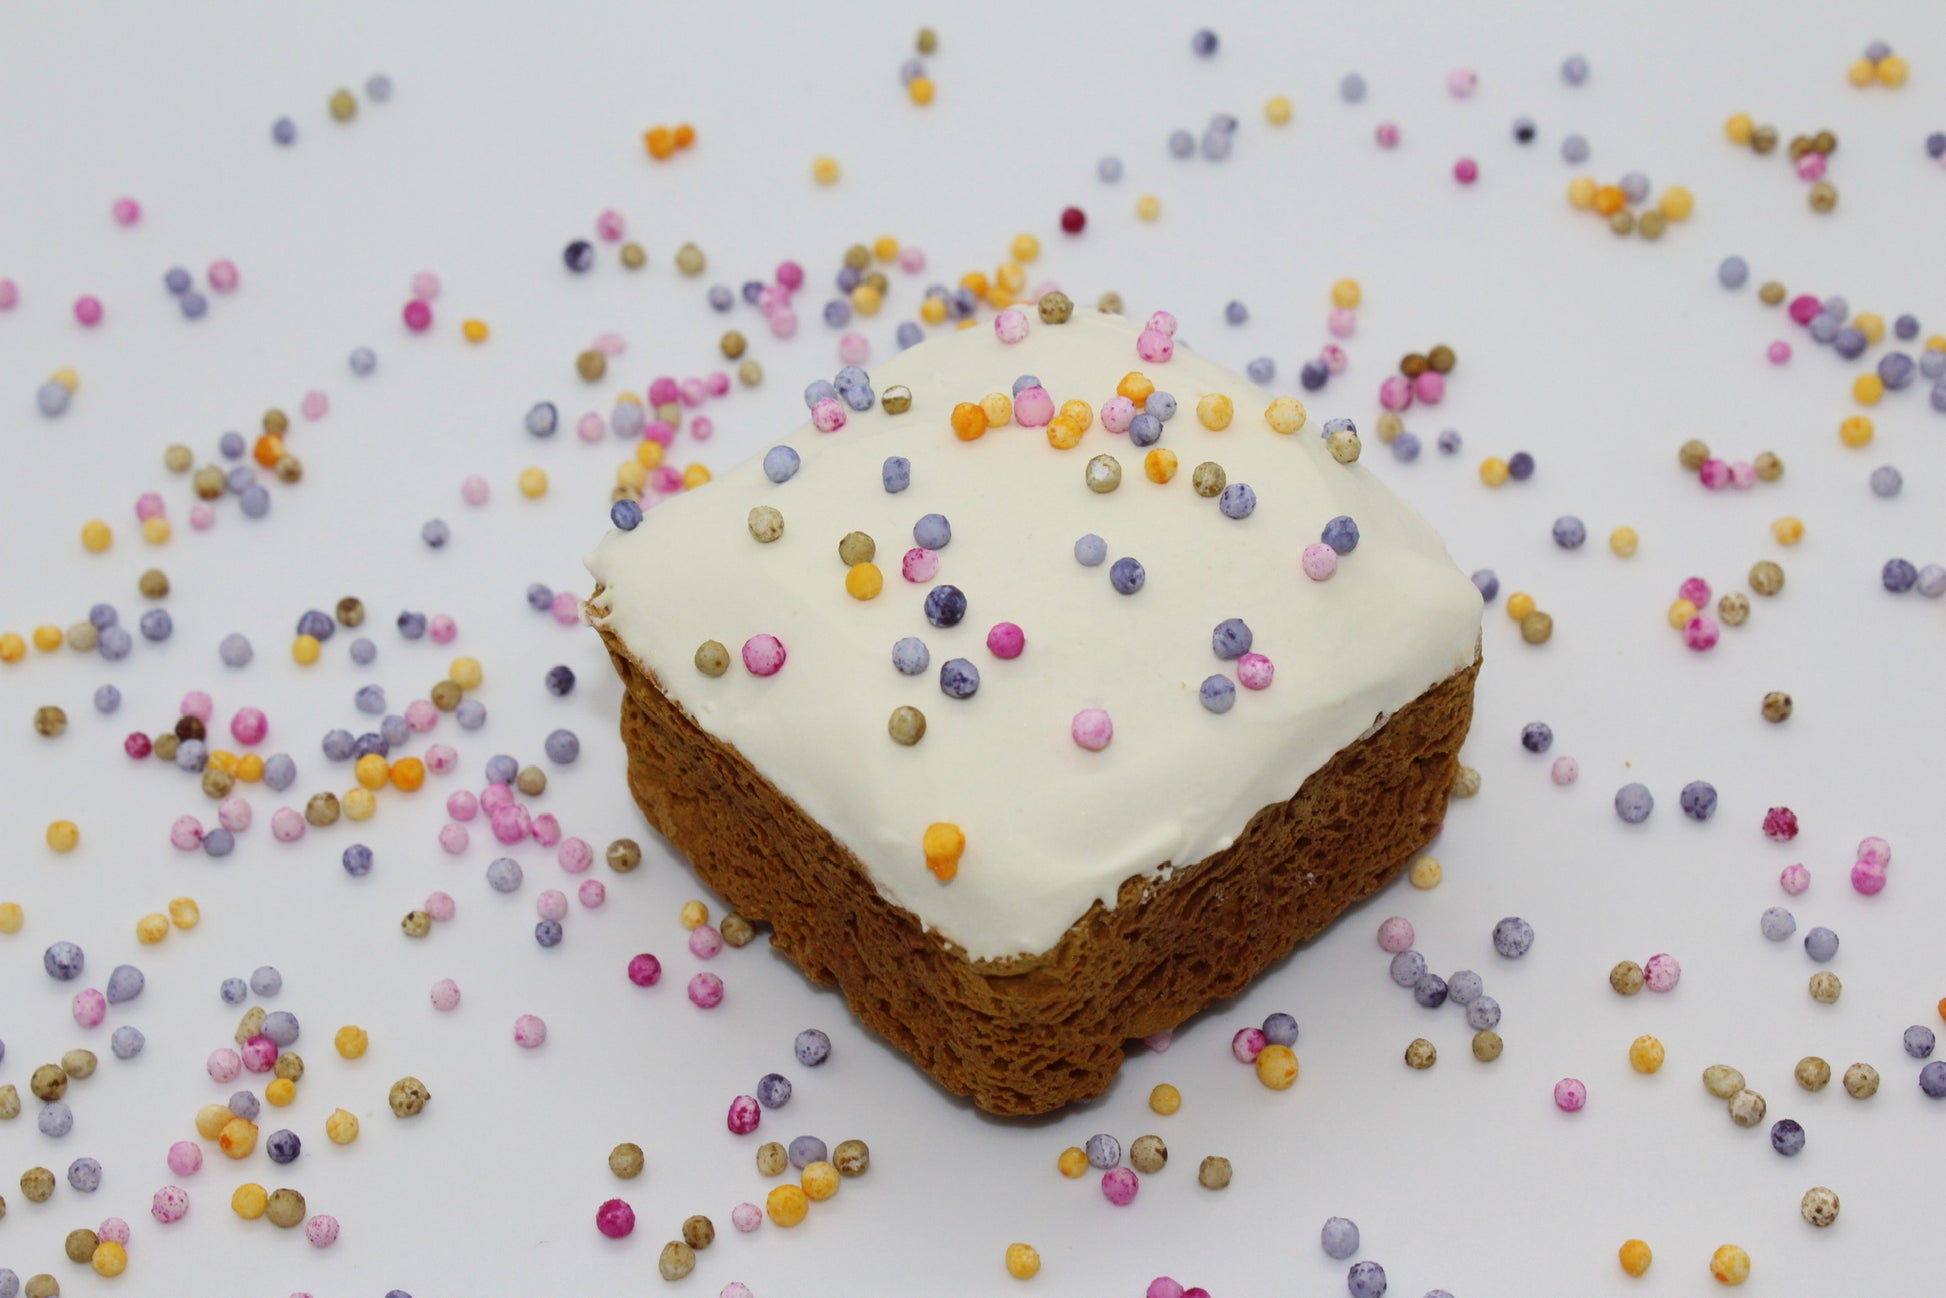 A sweet potato and carrot mini dog cake with white frosting and rainbow pearl sprinkles on top. There are rainbow pearl sprinkles all over the background.